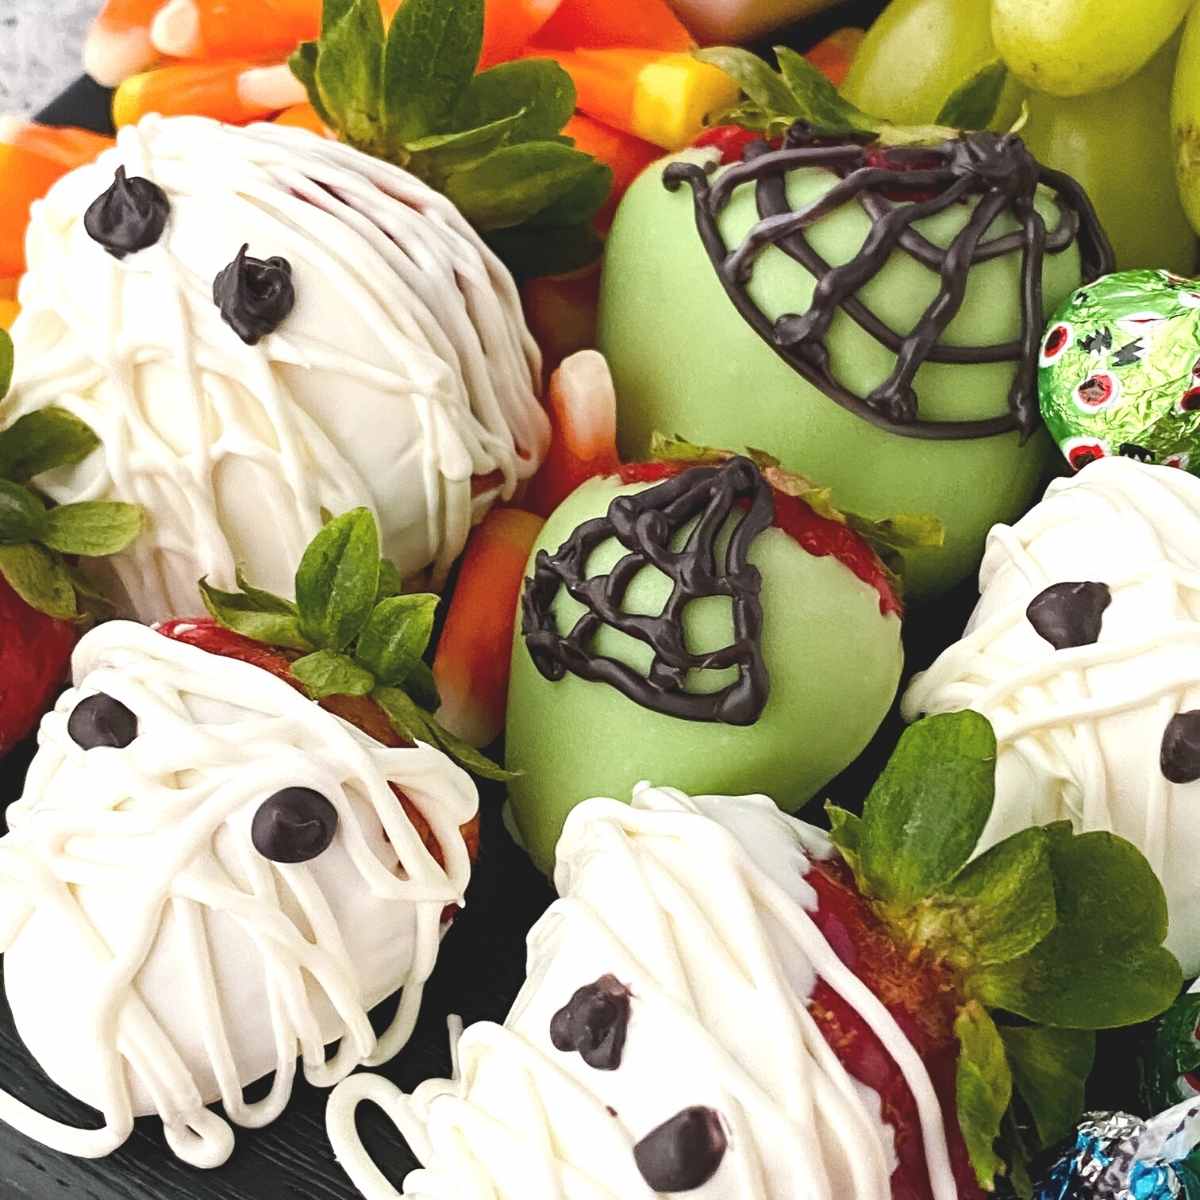 close up of mummies and spider chocolate covered strawberries for Halloween